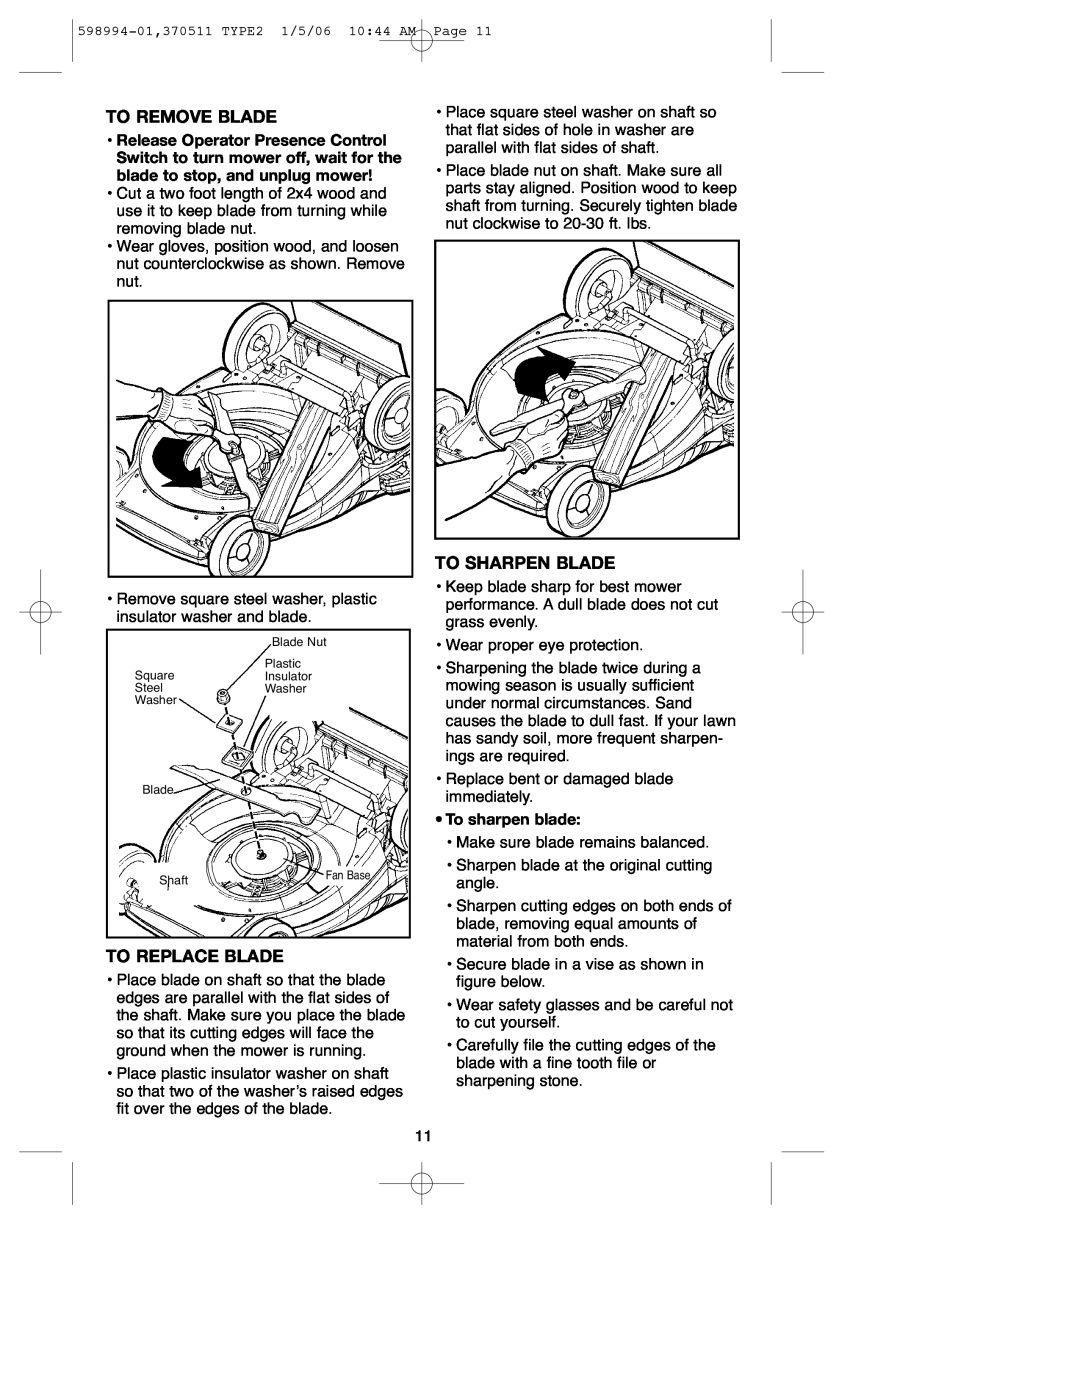 DeWalt 900.370511 instruction manual To Remove Blade, To Replace Blade, To Sharpen Blade, To sharpen blade 